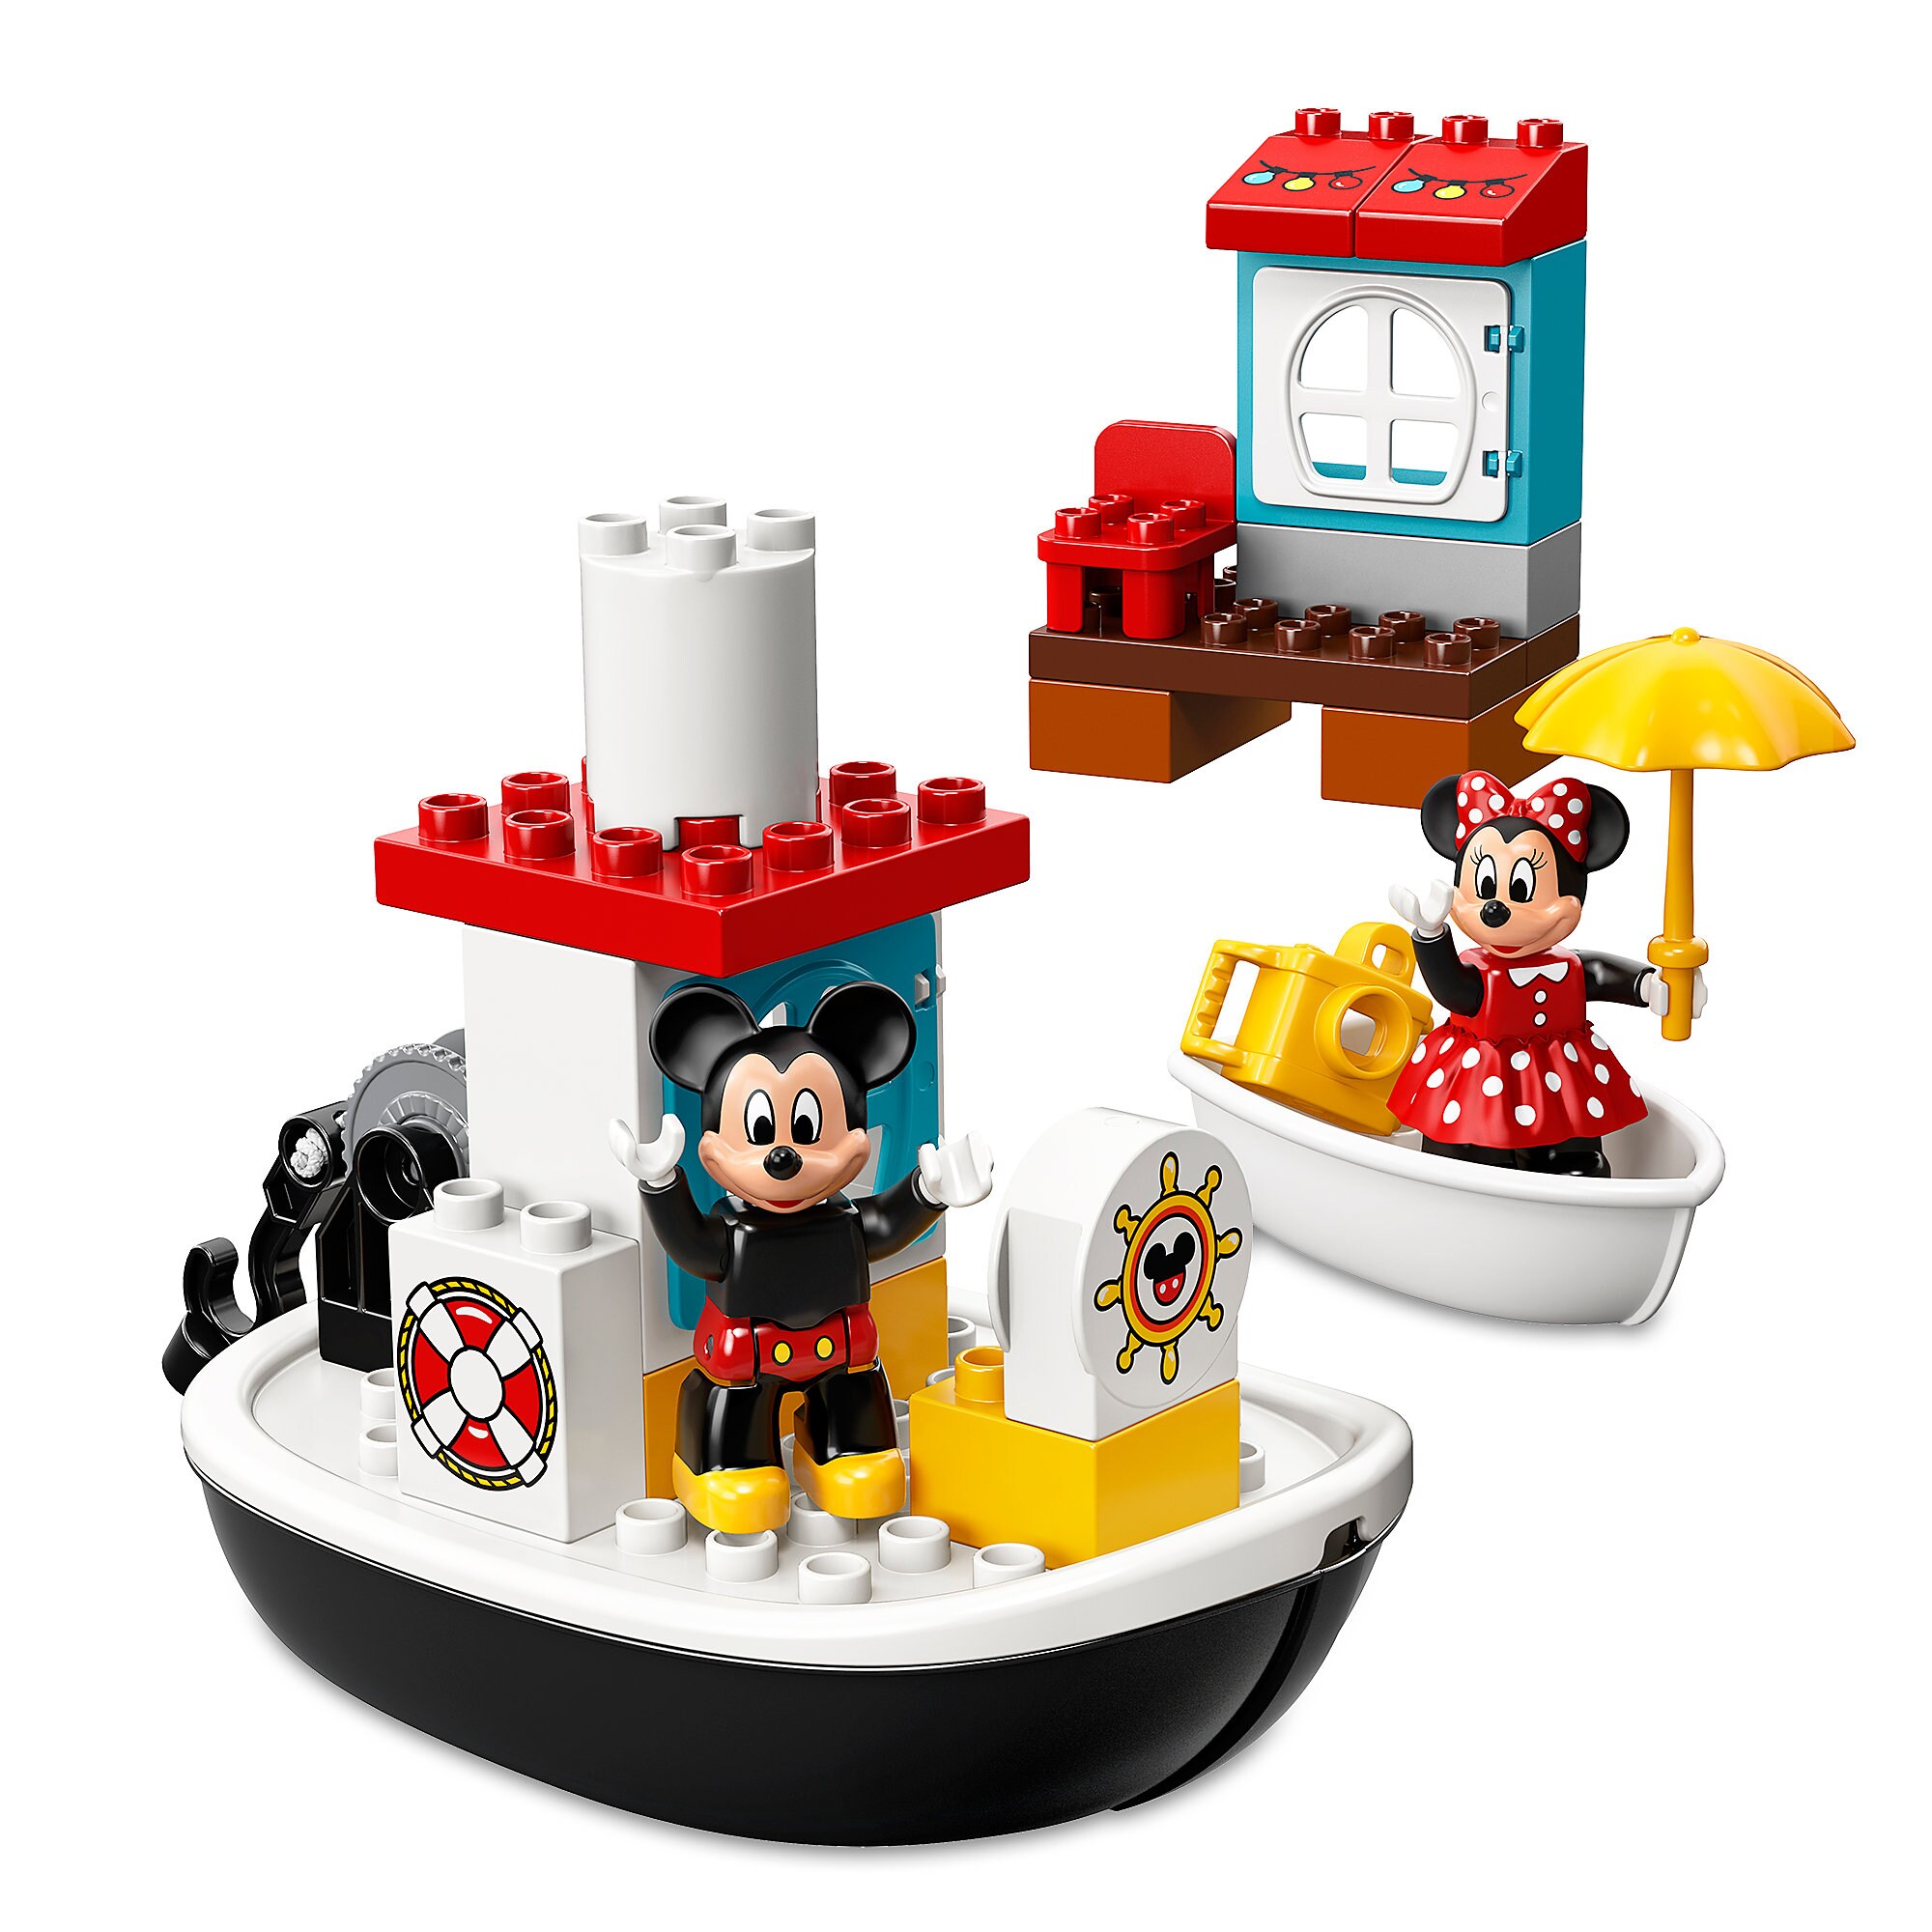 Mickey Mouse Boat Duplo Playset by LEGO - Mickey and the Roadster Racers